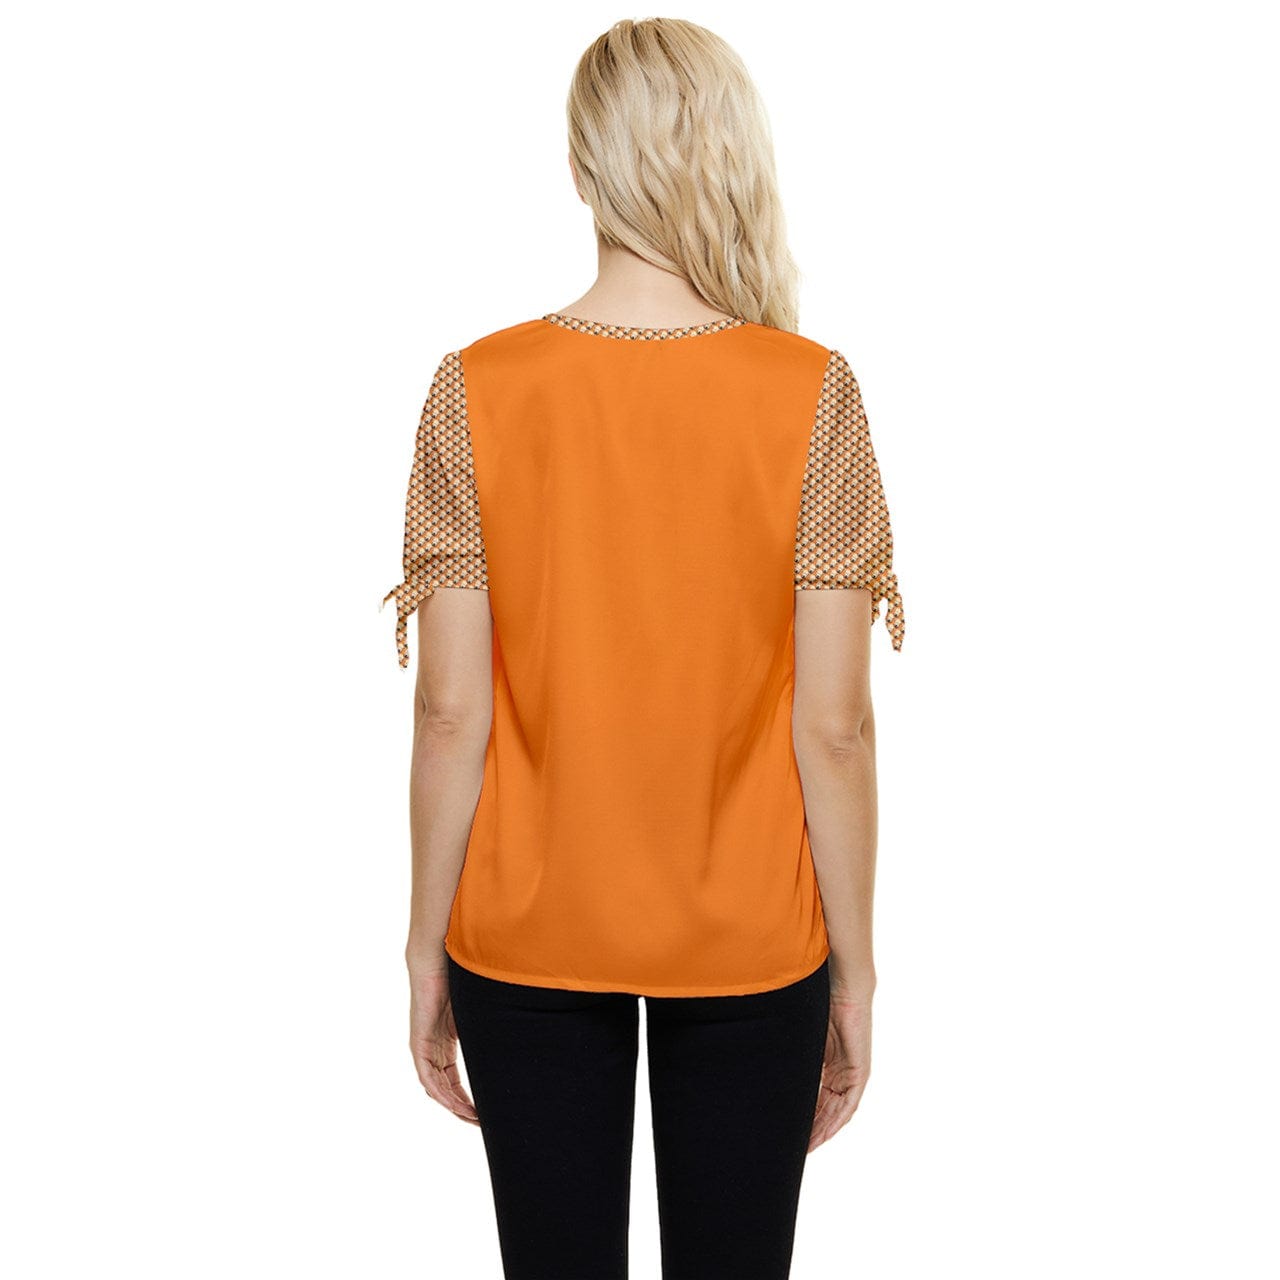 Women's Bow Sleeve Button Up Top - Orange